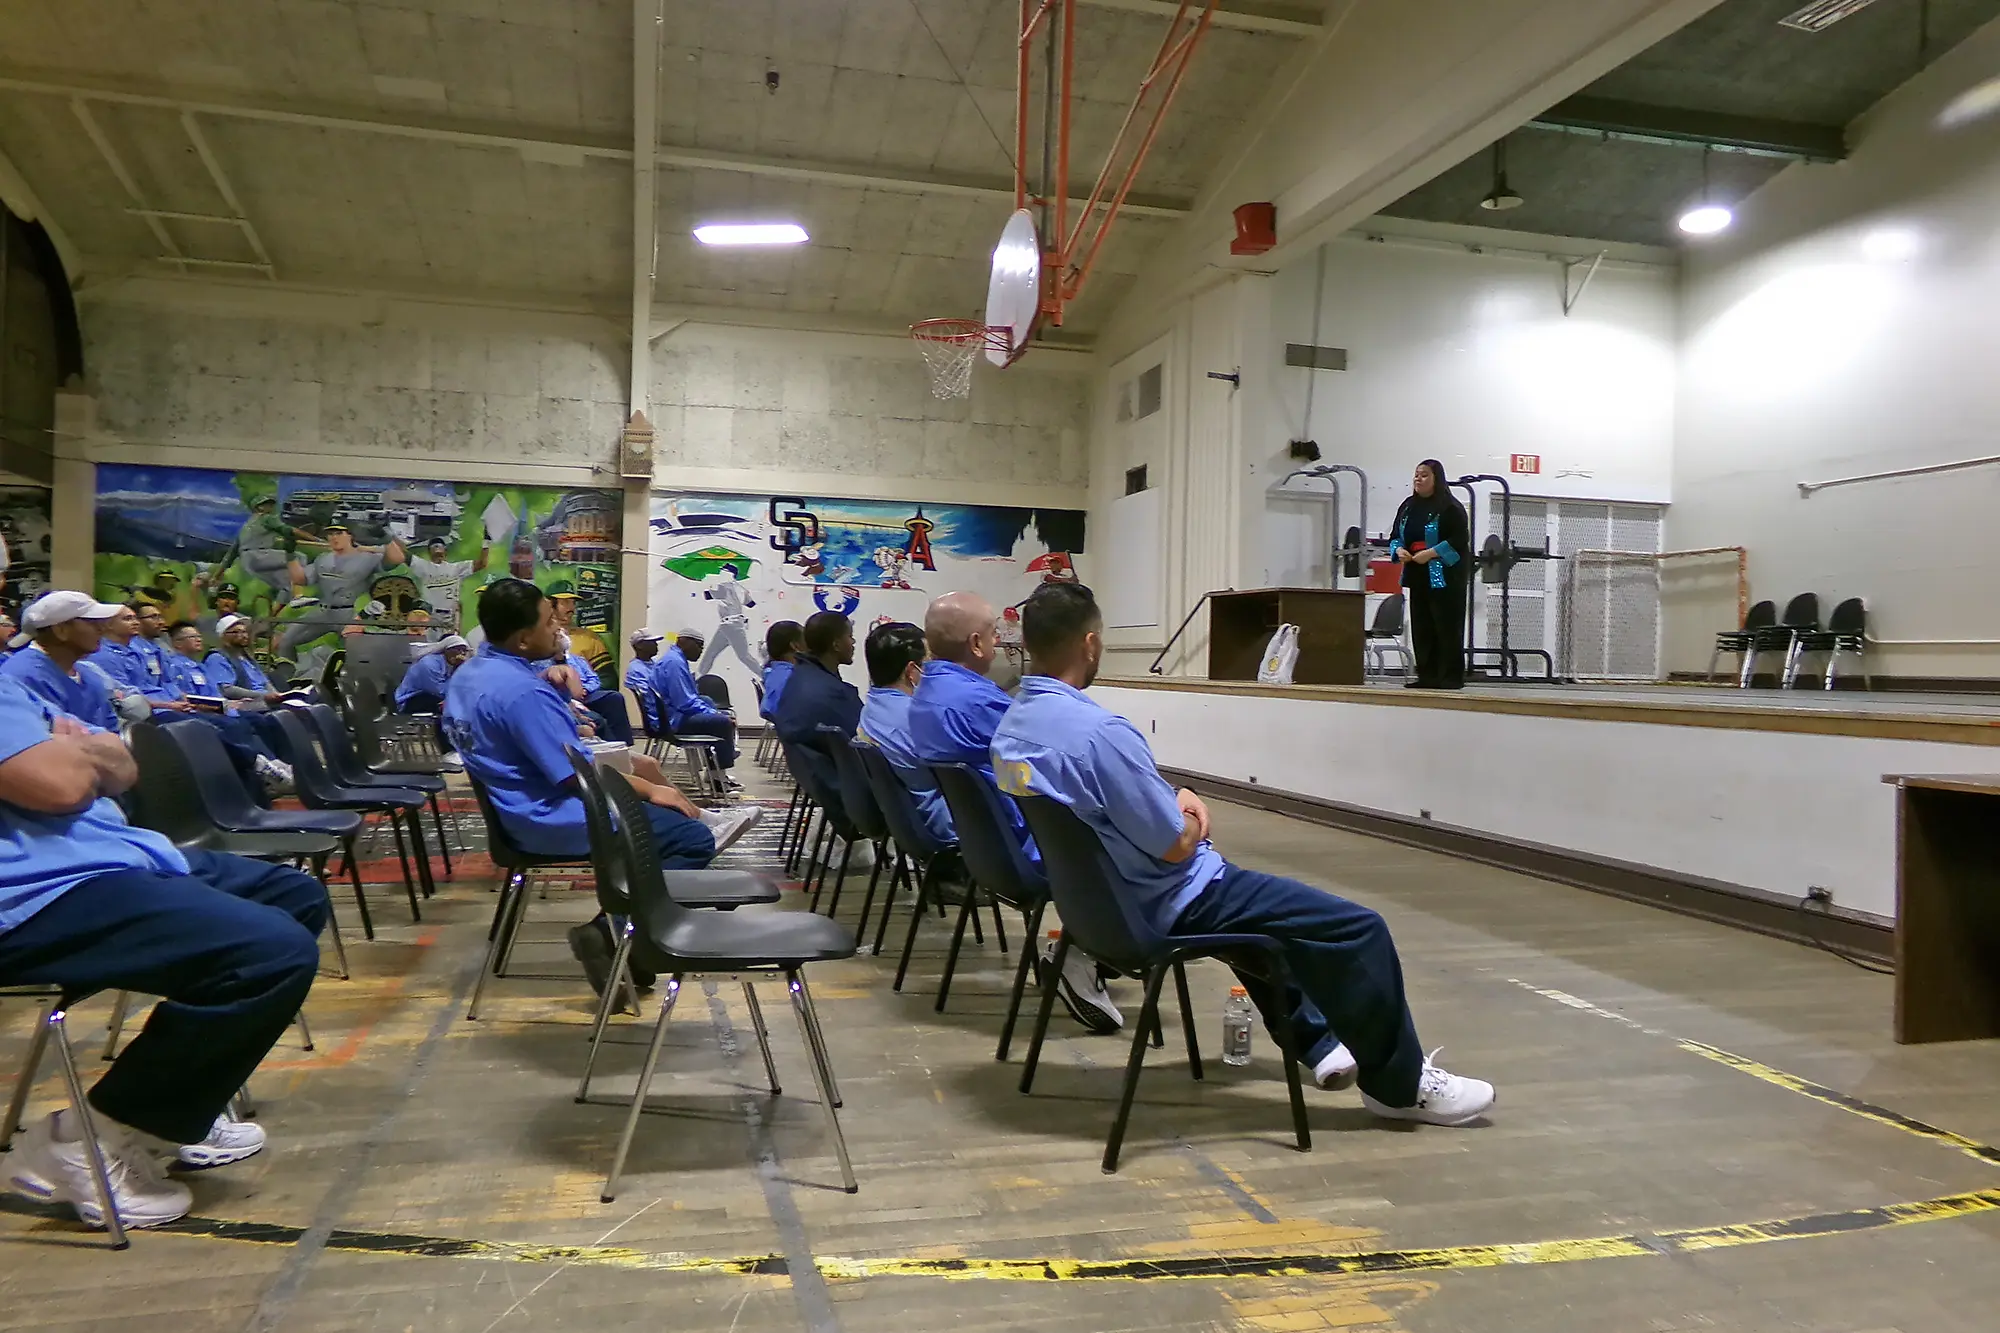 Gaosong Heu performs in a gymnasium with seated men all clad in blue at Salinas Valley State Prison in California.